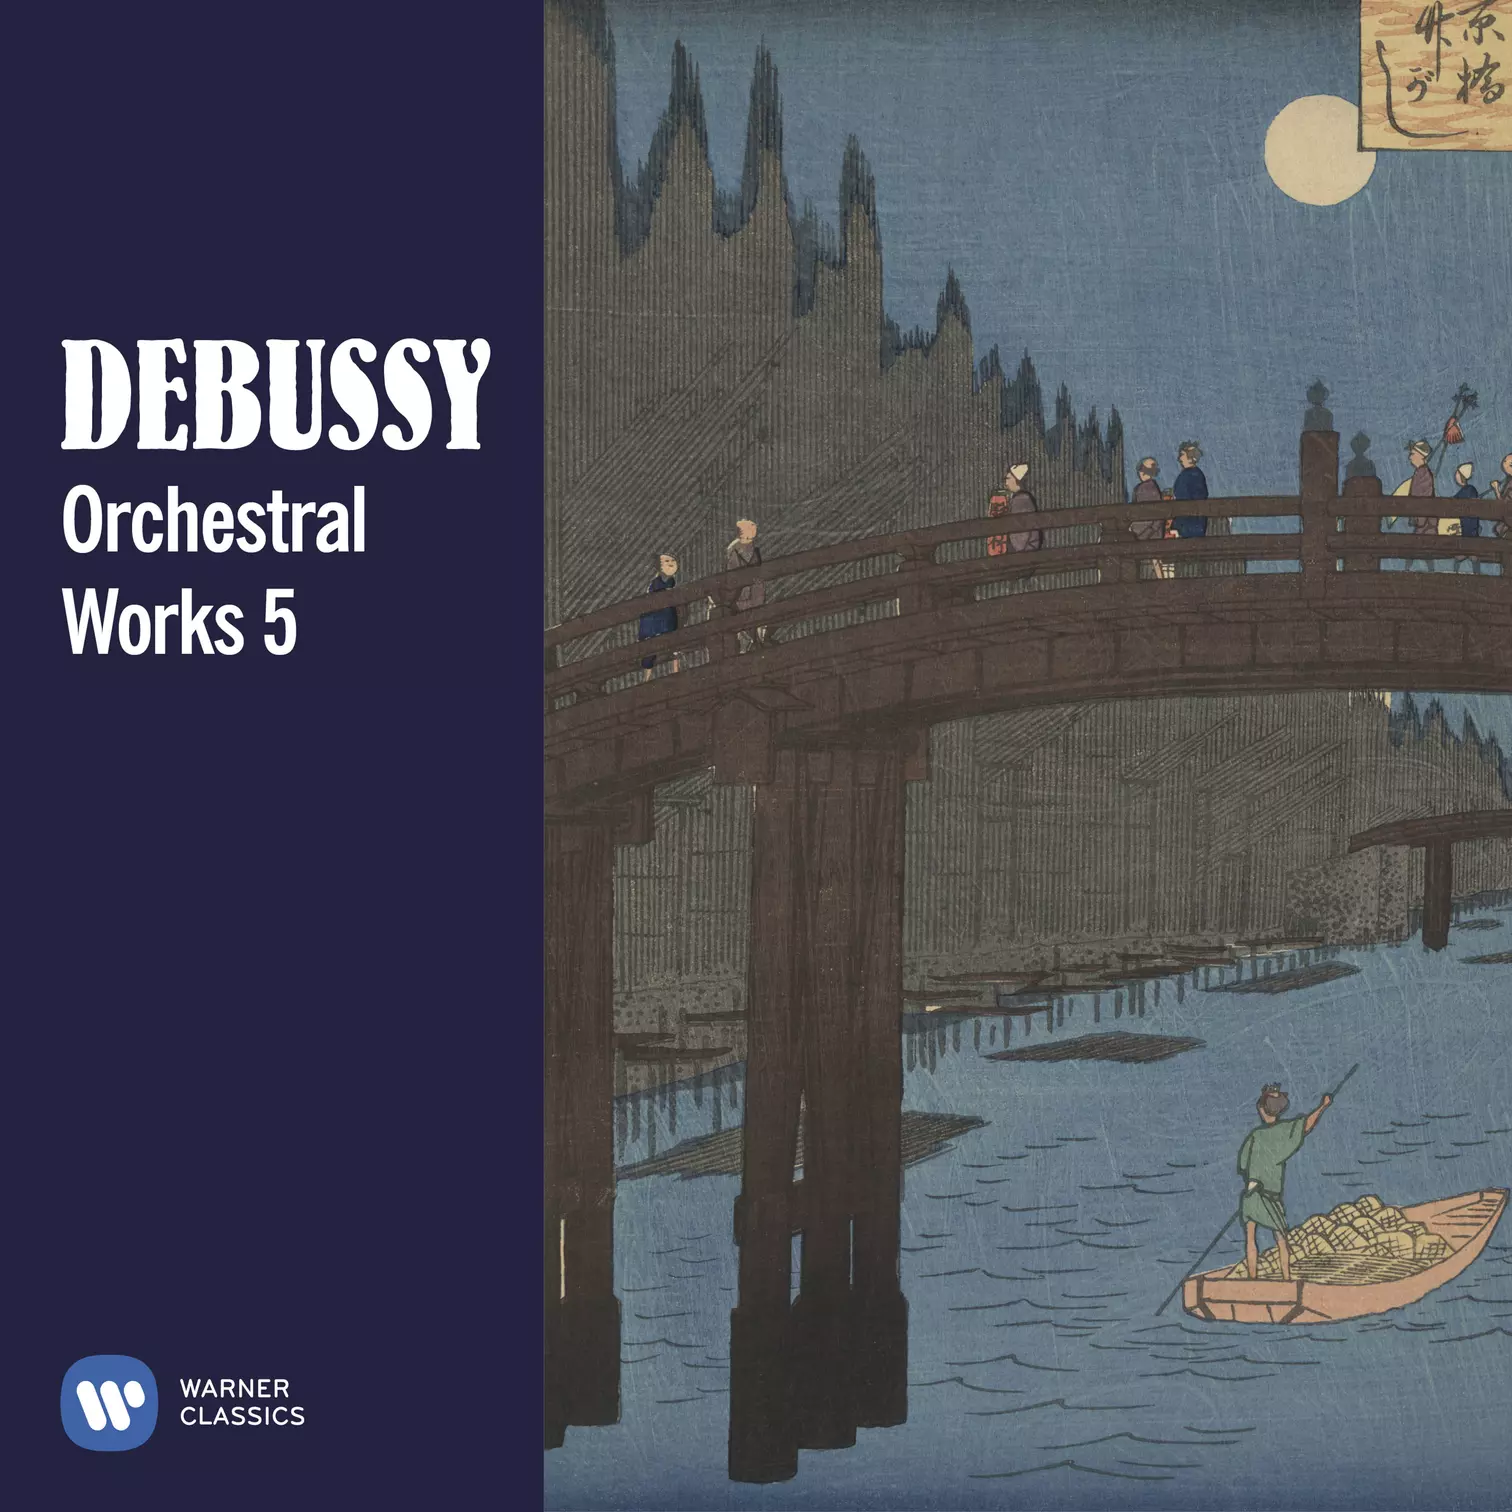 Debussy: Orchestral Works 5